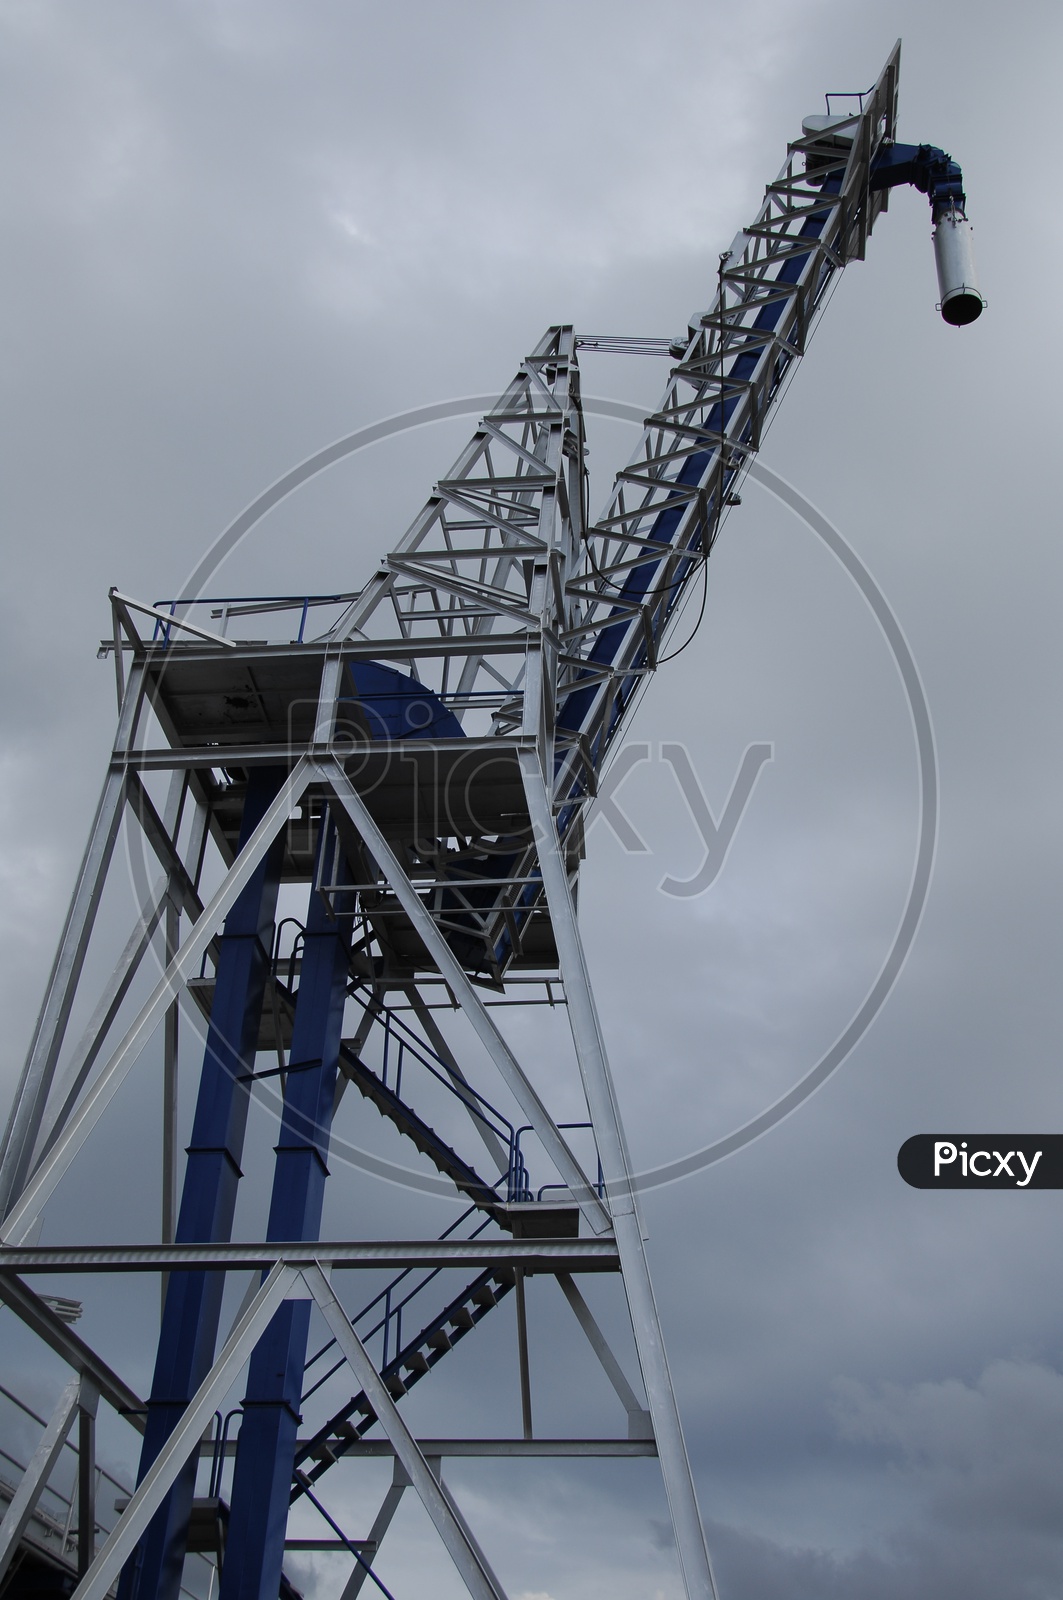 Crane equipment with cloudy sky in background